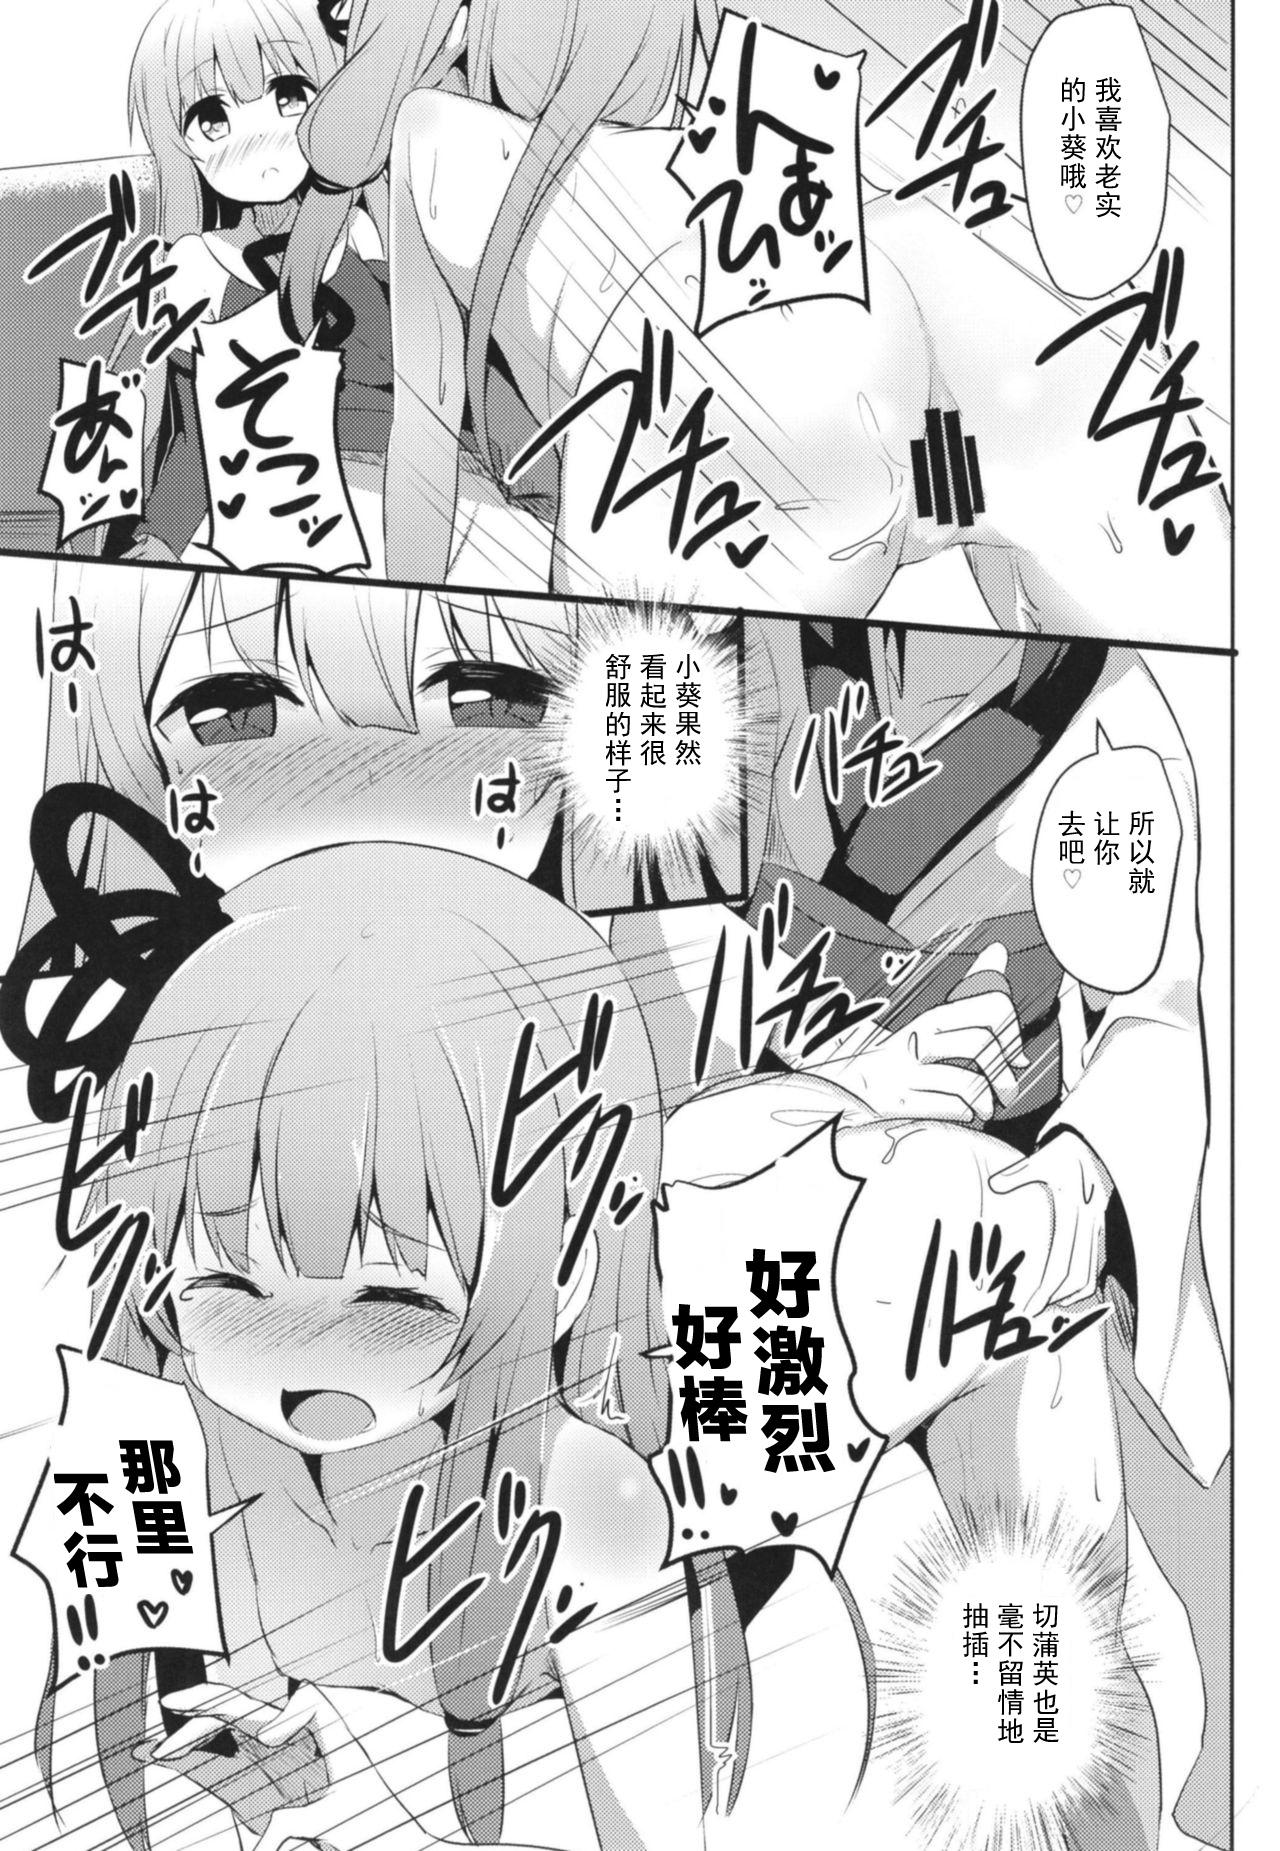 Anal [Milk Pudding (Jamcy)] Akane-chan Challenge! 4-kaime (VOICEROID) [Chinese] [古早个人汉化] [Digital] - Voiceroid Ethnic - Page 11